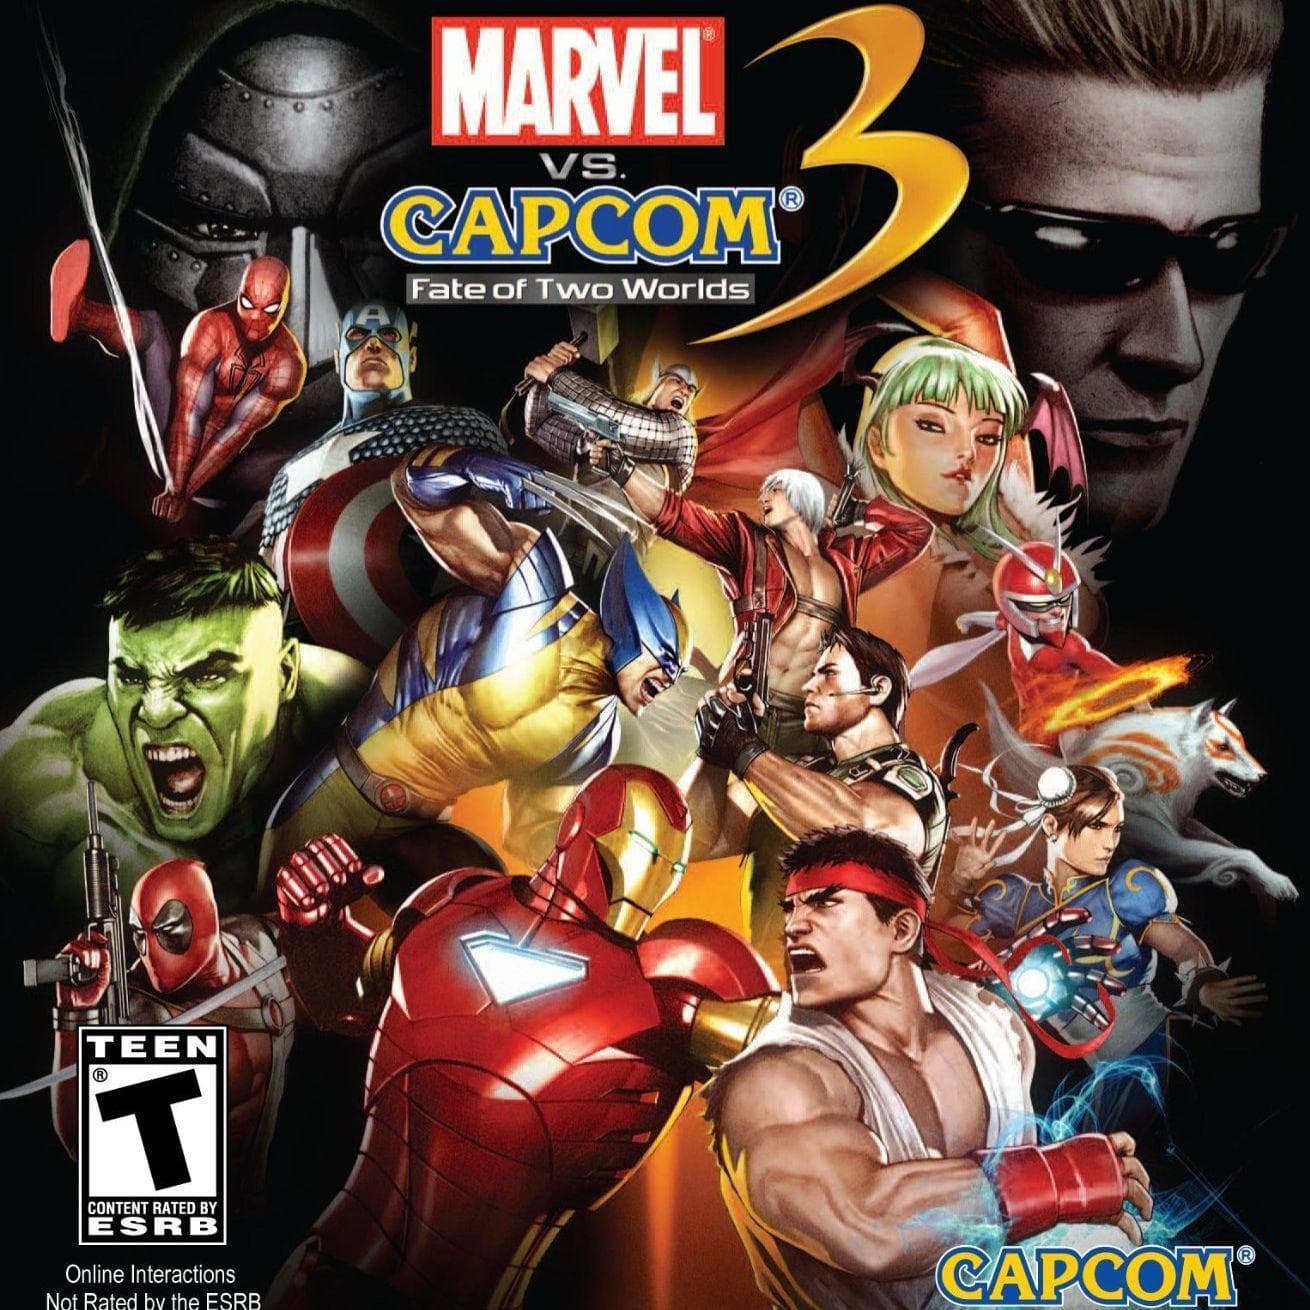 Marvel vs. Capcom 3: Fate of Two Worlds for ps2 